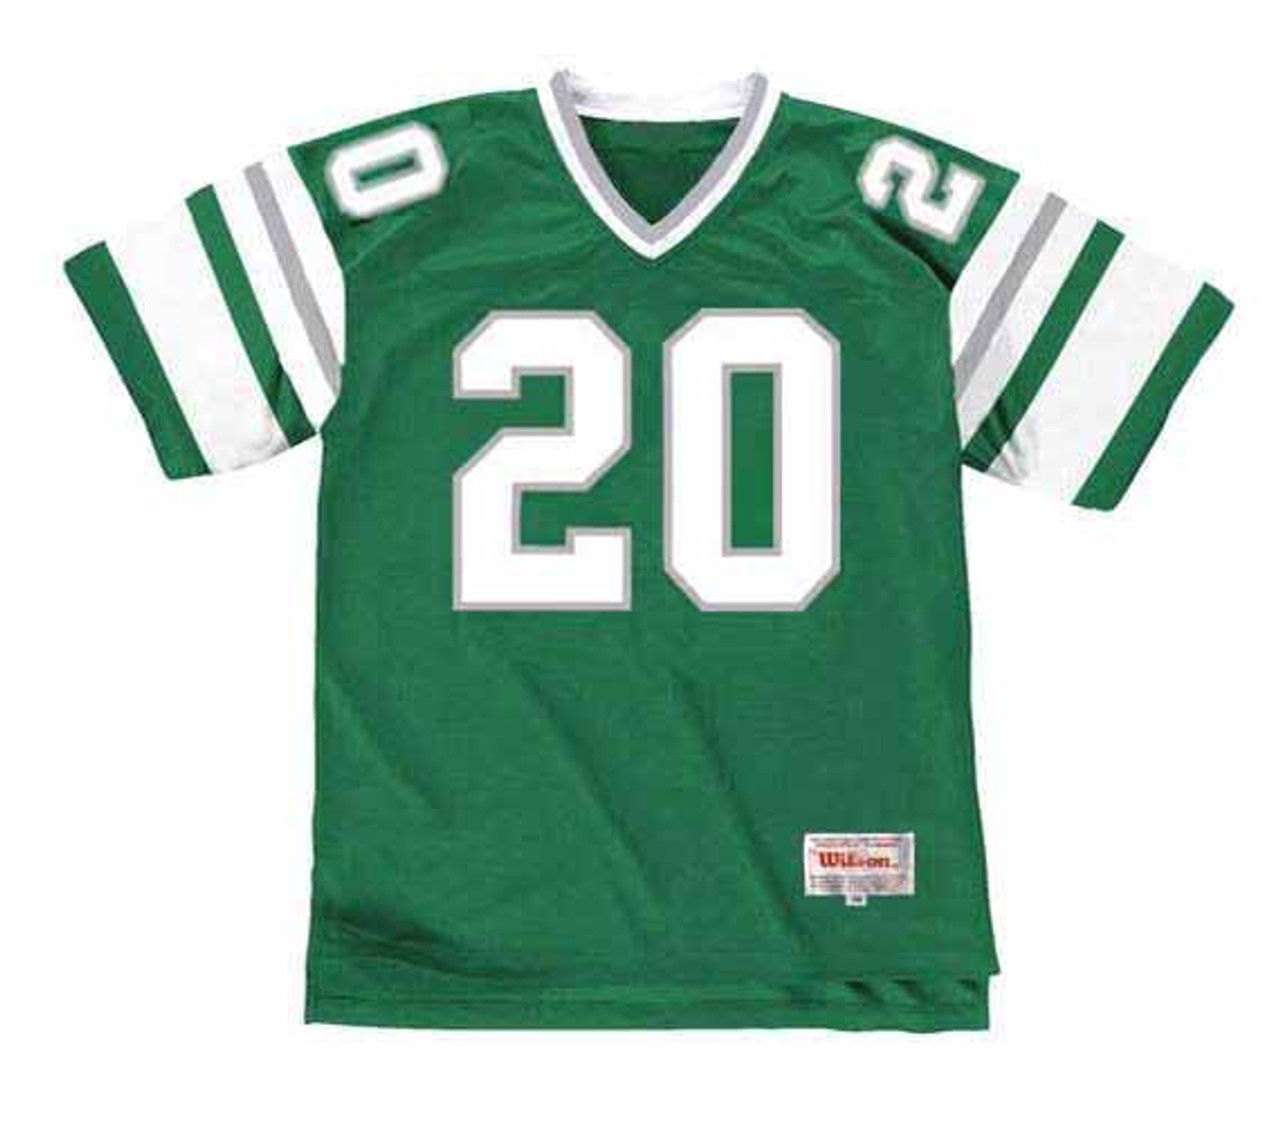 ANDRE WATERS Philadelphia Eagles 1984 Home Wilson Throwback NFL Football  Jersey